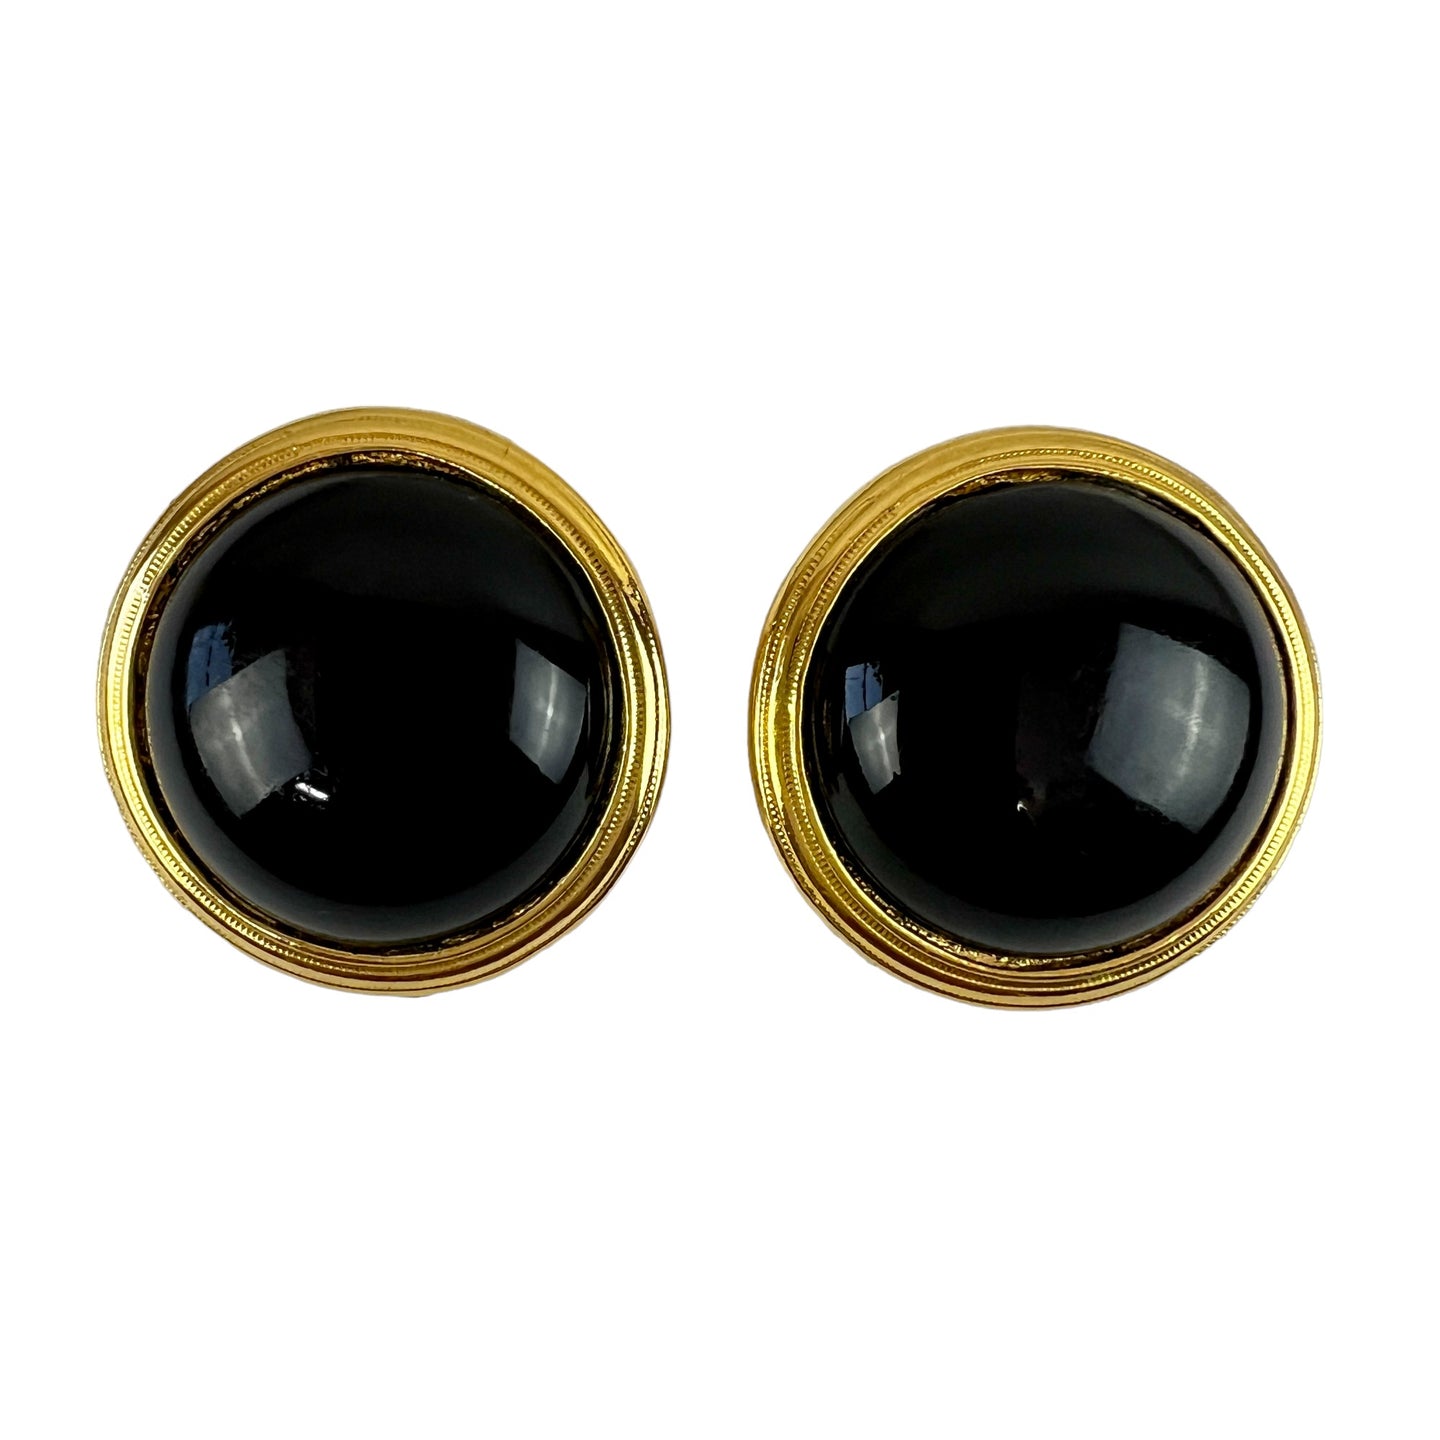 Vintage Cabachon Black and Gold Tone Women Earrings